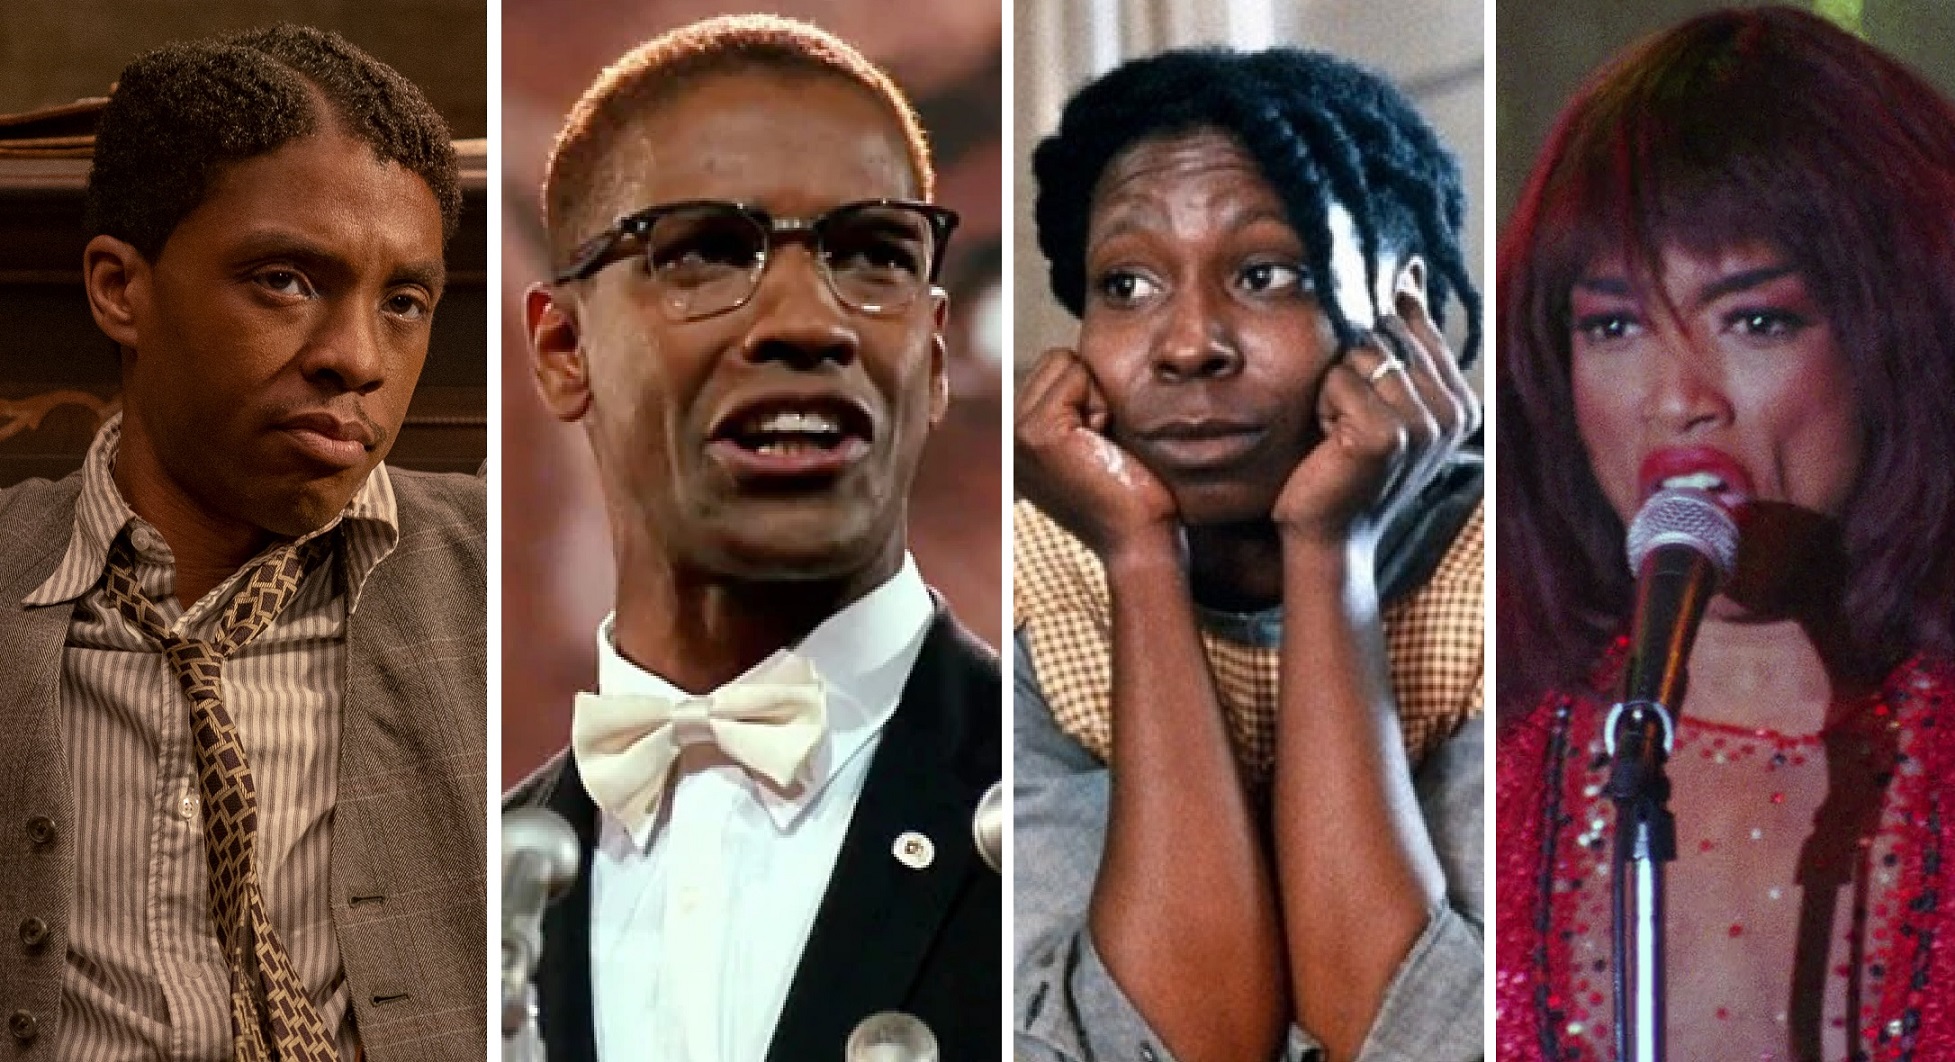 10 Times Oscars Failed To Honor Black Artists Rightly – The Most Unforgettable Academy Snubs